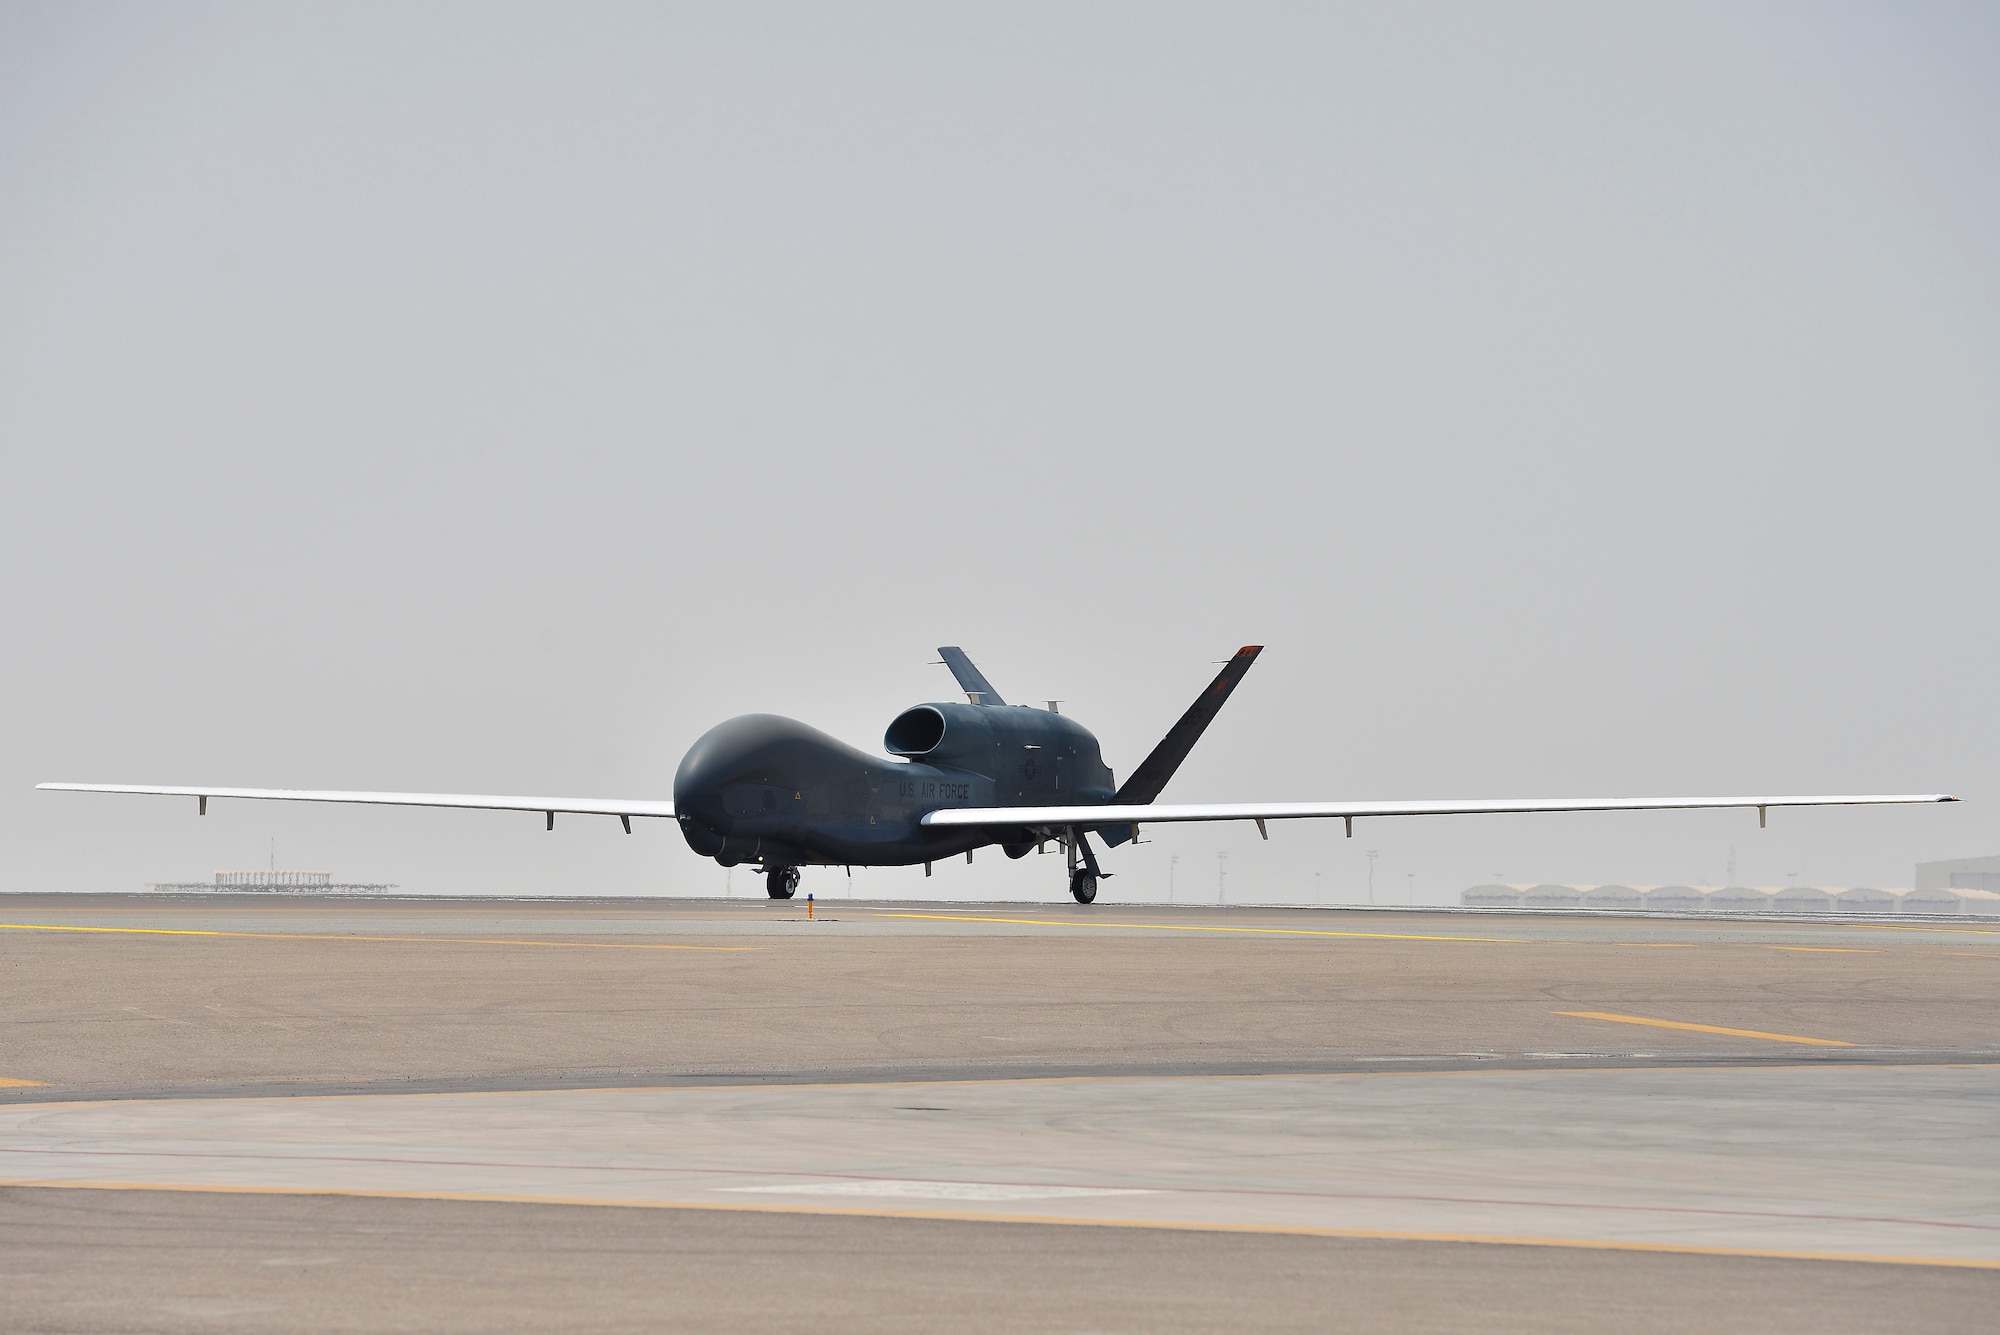 An RQ-4 Global Hawk taxis on the flightline after a sortie an inspection at an undisclosed location in Southwest Asia September 18, 2015. (U.S. Air Force photo/Tech. Sgt. Christopher Boitz)